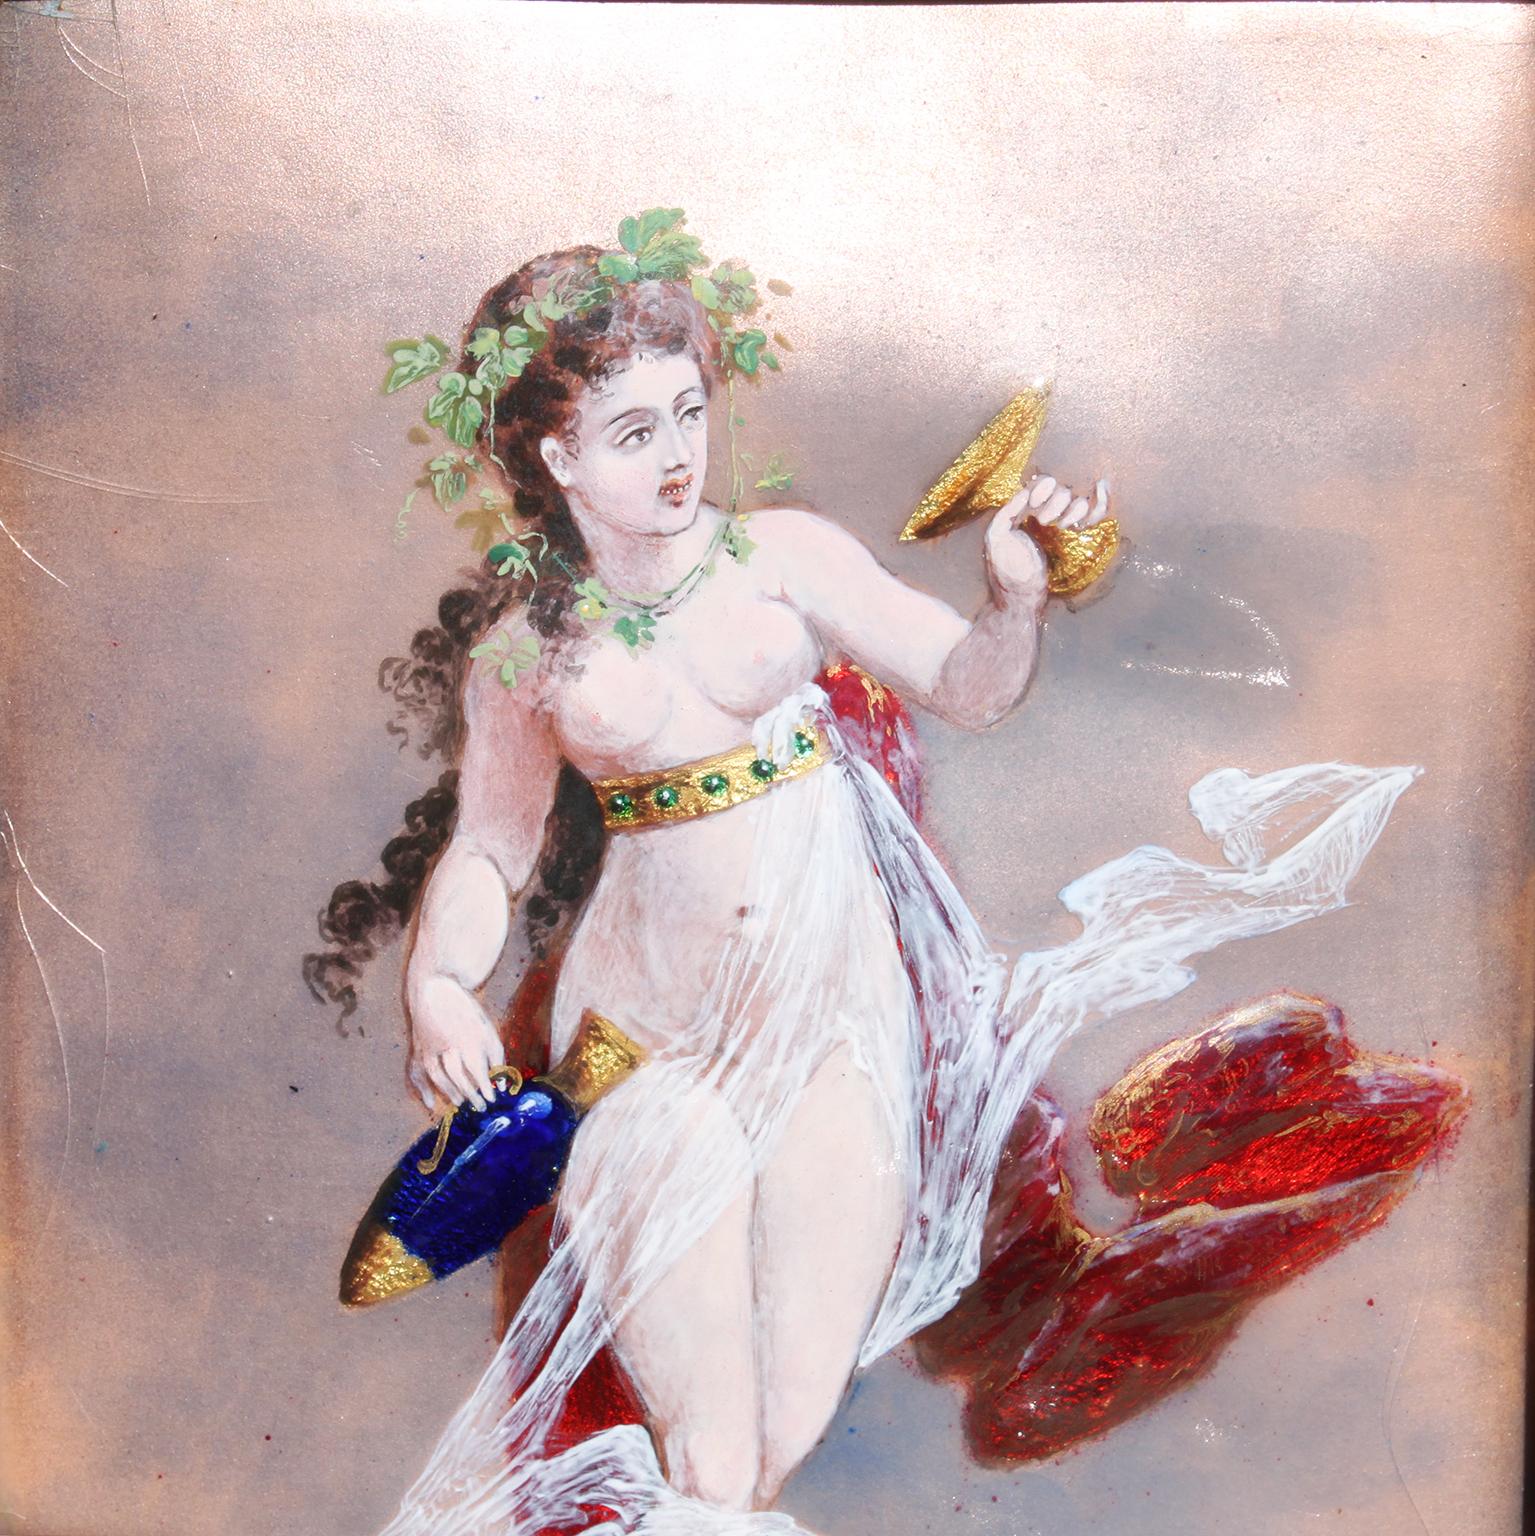 An Allegorical Belle Époque Limoges Enamel Painting Plaque of a Semi-Nude Bacchante. The convex  baked enamel copper plaque finely painted depicting a scantily clad young female Maenad or mainade, which were women devoted to the god Bacchus